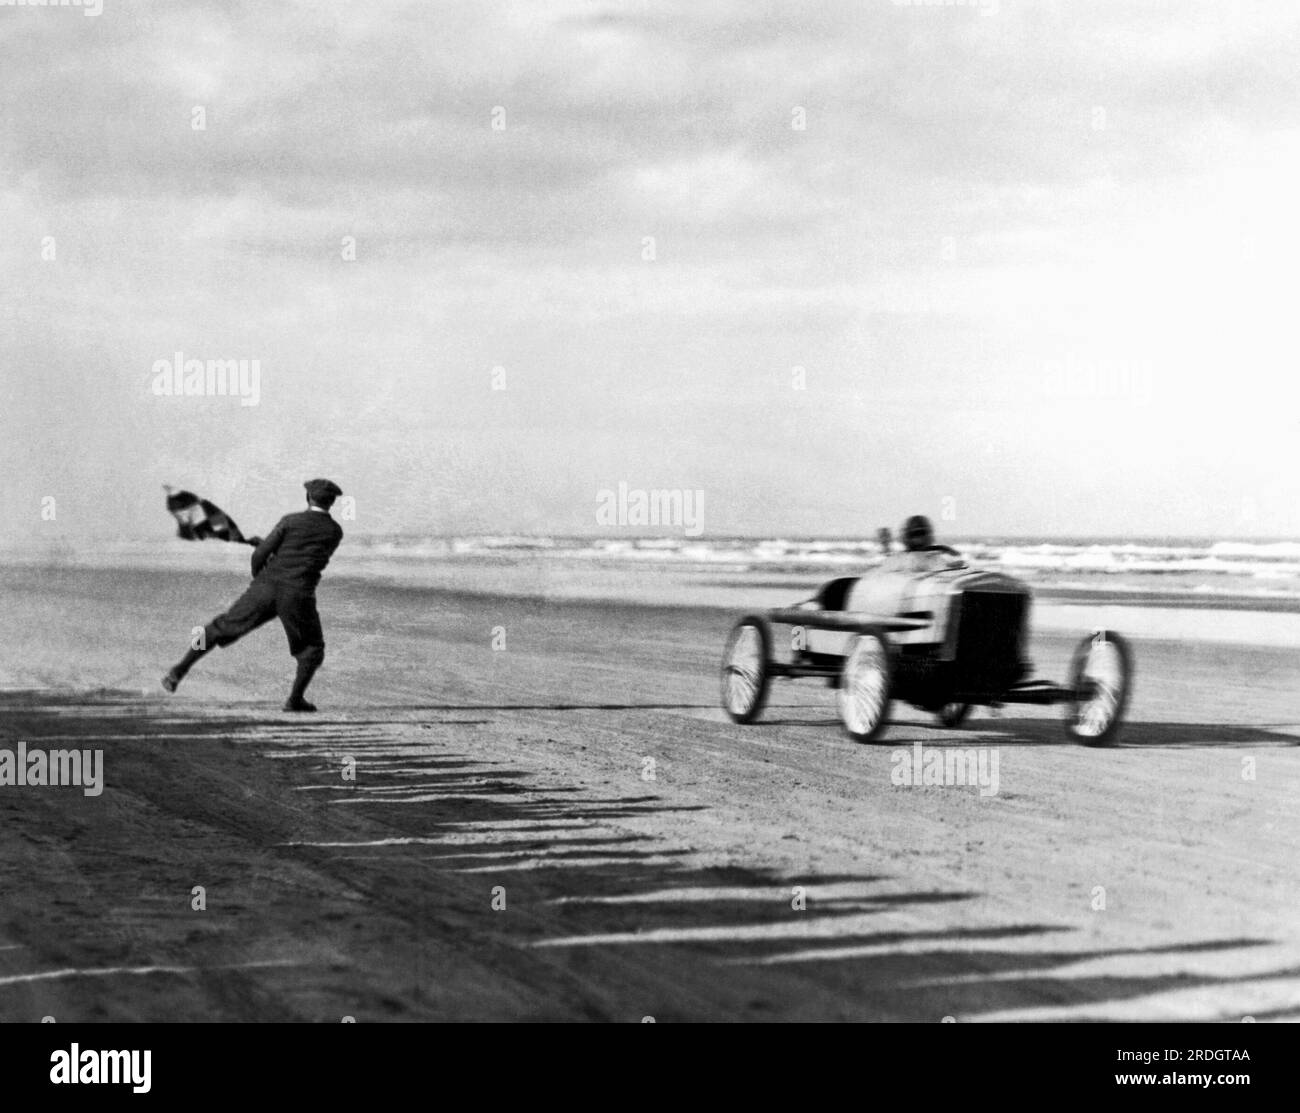 Daytona Beach, Florida:  January 1, 1926 Sig Haugdahl gets the checkered flag as he wins the opening event of the New Year's Day Races in his Daytona Cyclone race car. Stock Photo